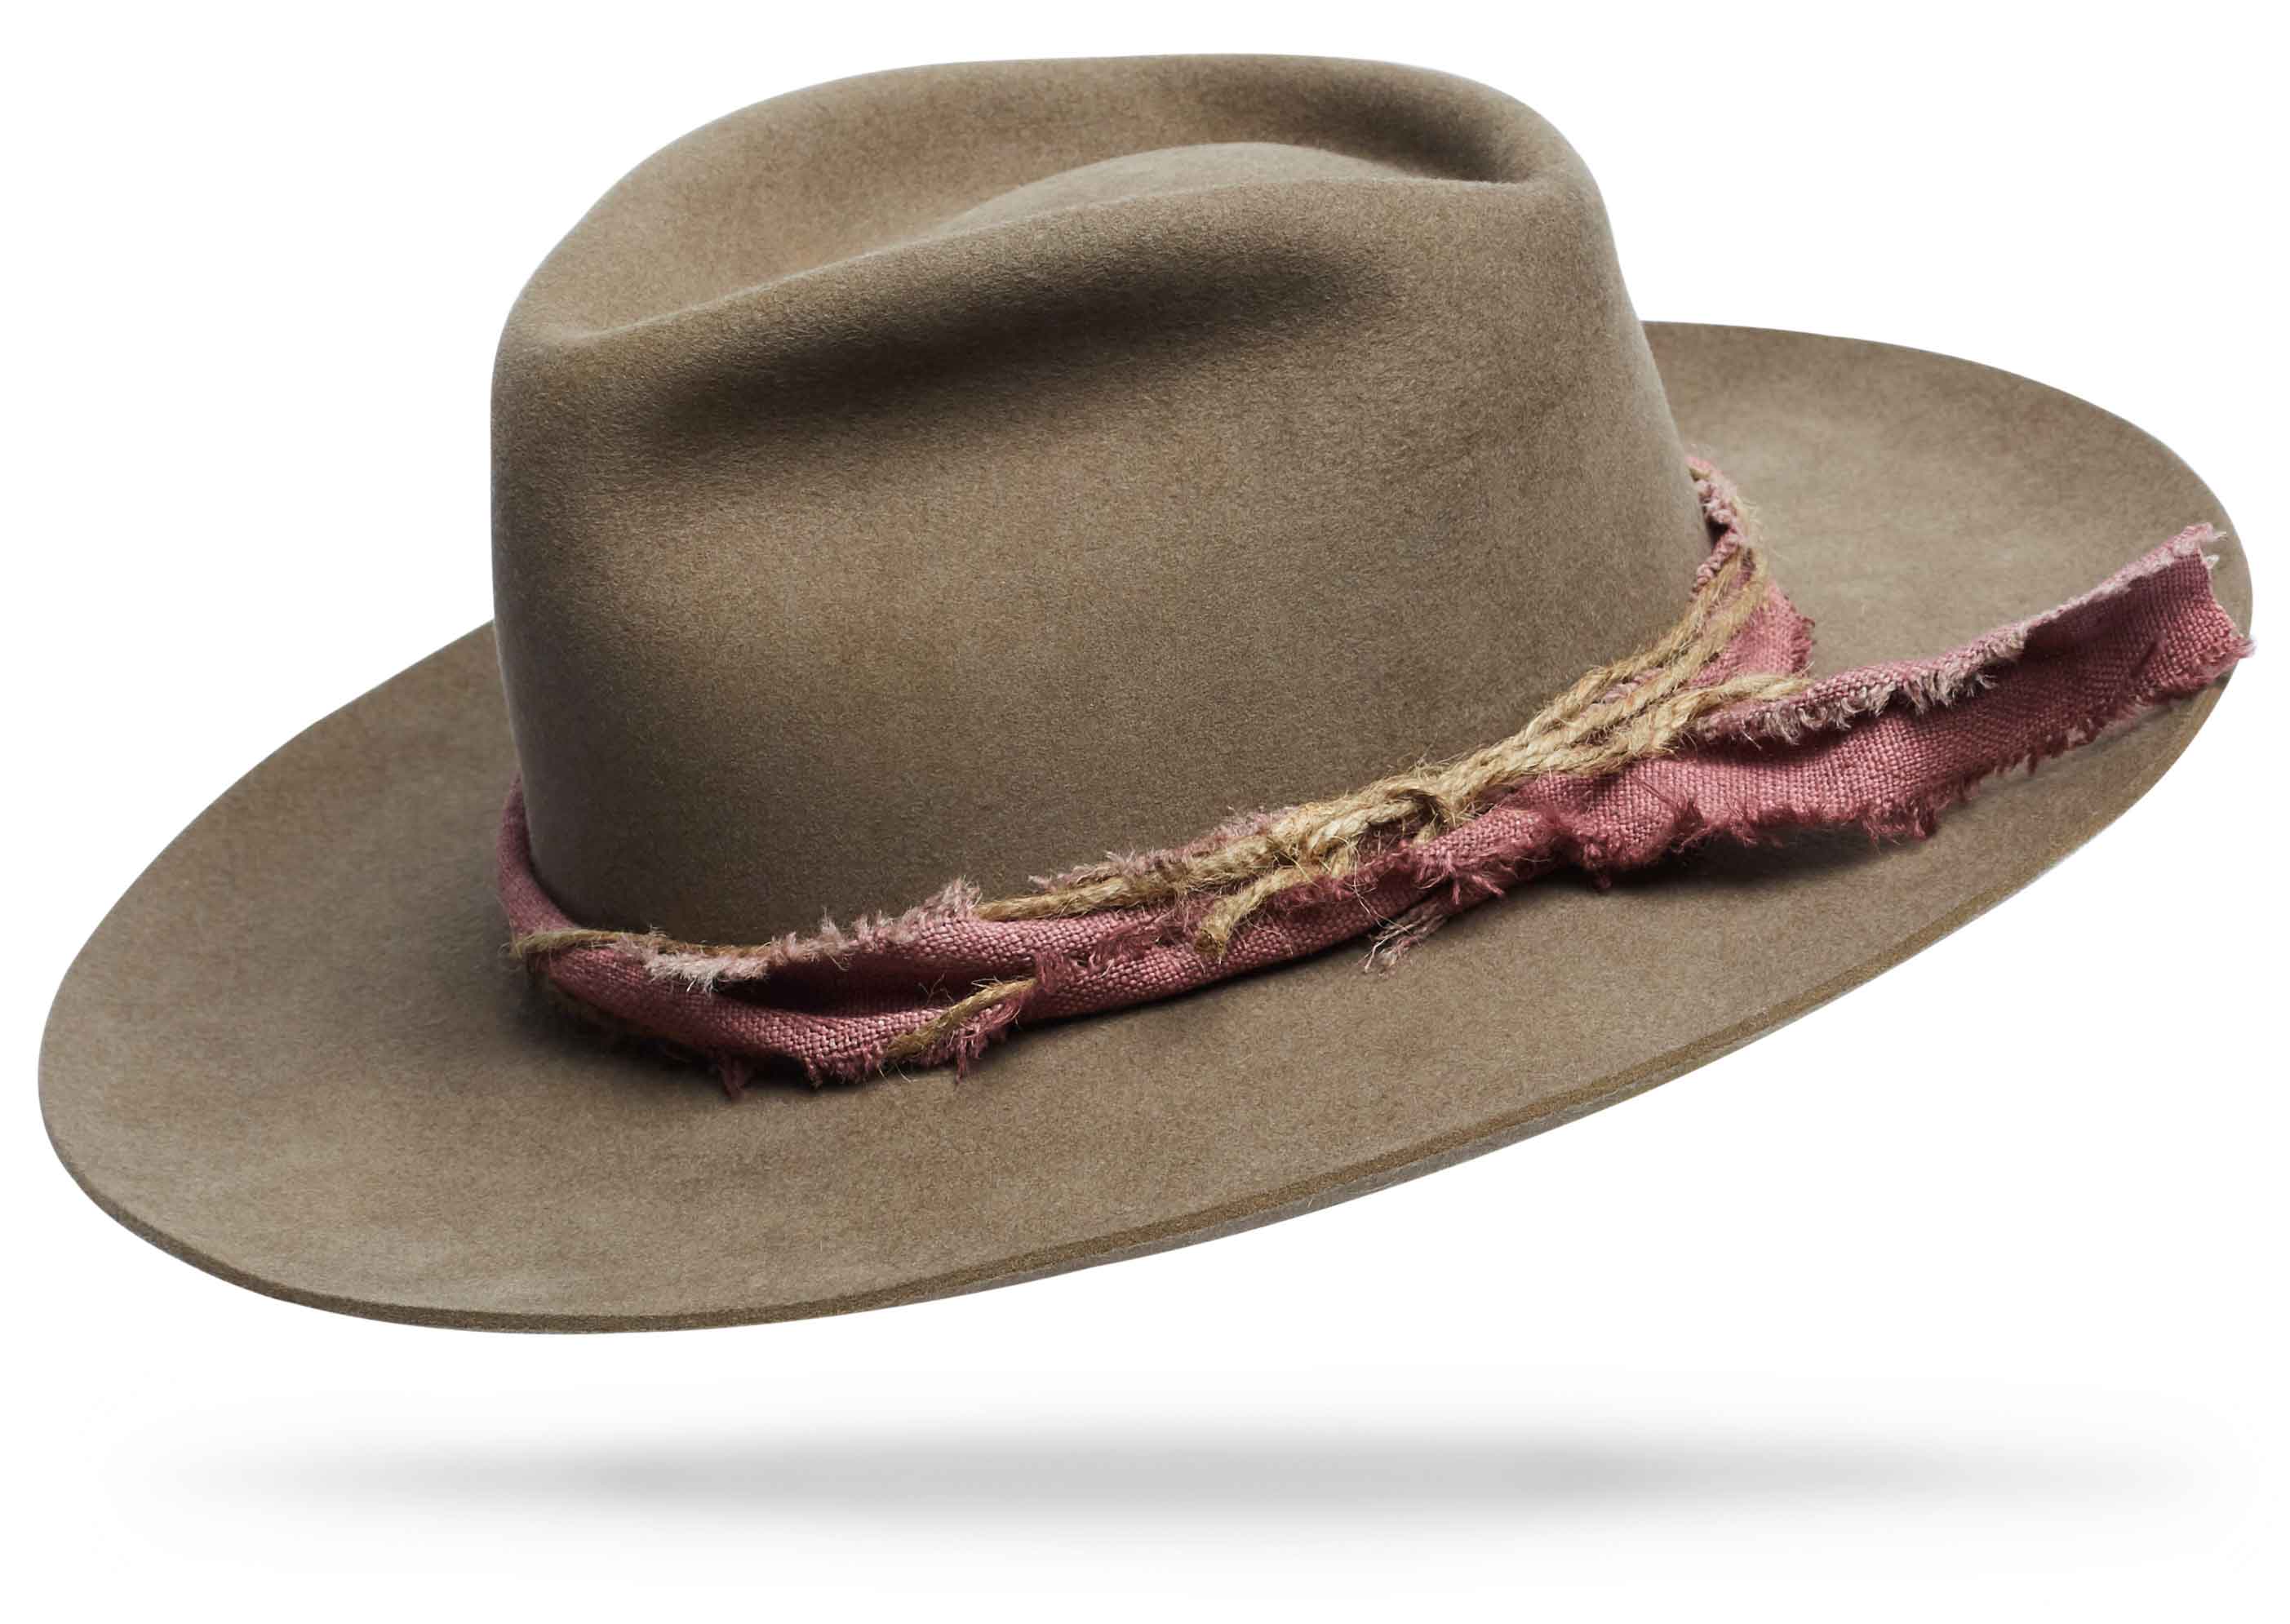 Design
This 100% beaver beauty with 3 1/2 brim 4 wide teardrop crown. Dressed with a dusty rose woven linen band and hemp cord. Revisit the rose-colored rocks and champagne sand mesas with this new friend.
Material
100% Western Beaver Fur Felt Hat sustainably acquired
Specifications
3 1/2 brim 4 wide teardrop crown. Dressed with a dusty rose woven linen band and hemp cord. Handmade in our atelier in NYC. Please allow 6-8 weeks to custom make this special piece.